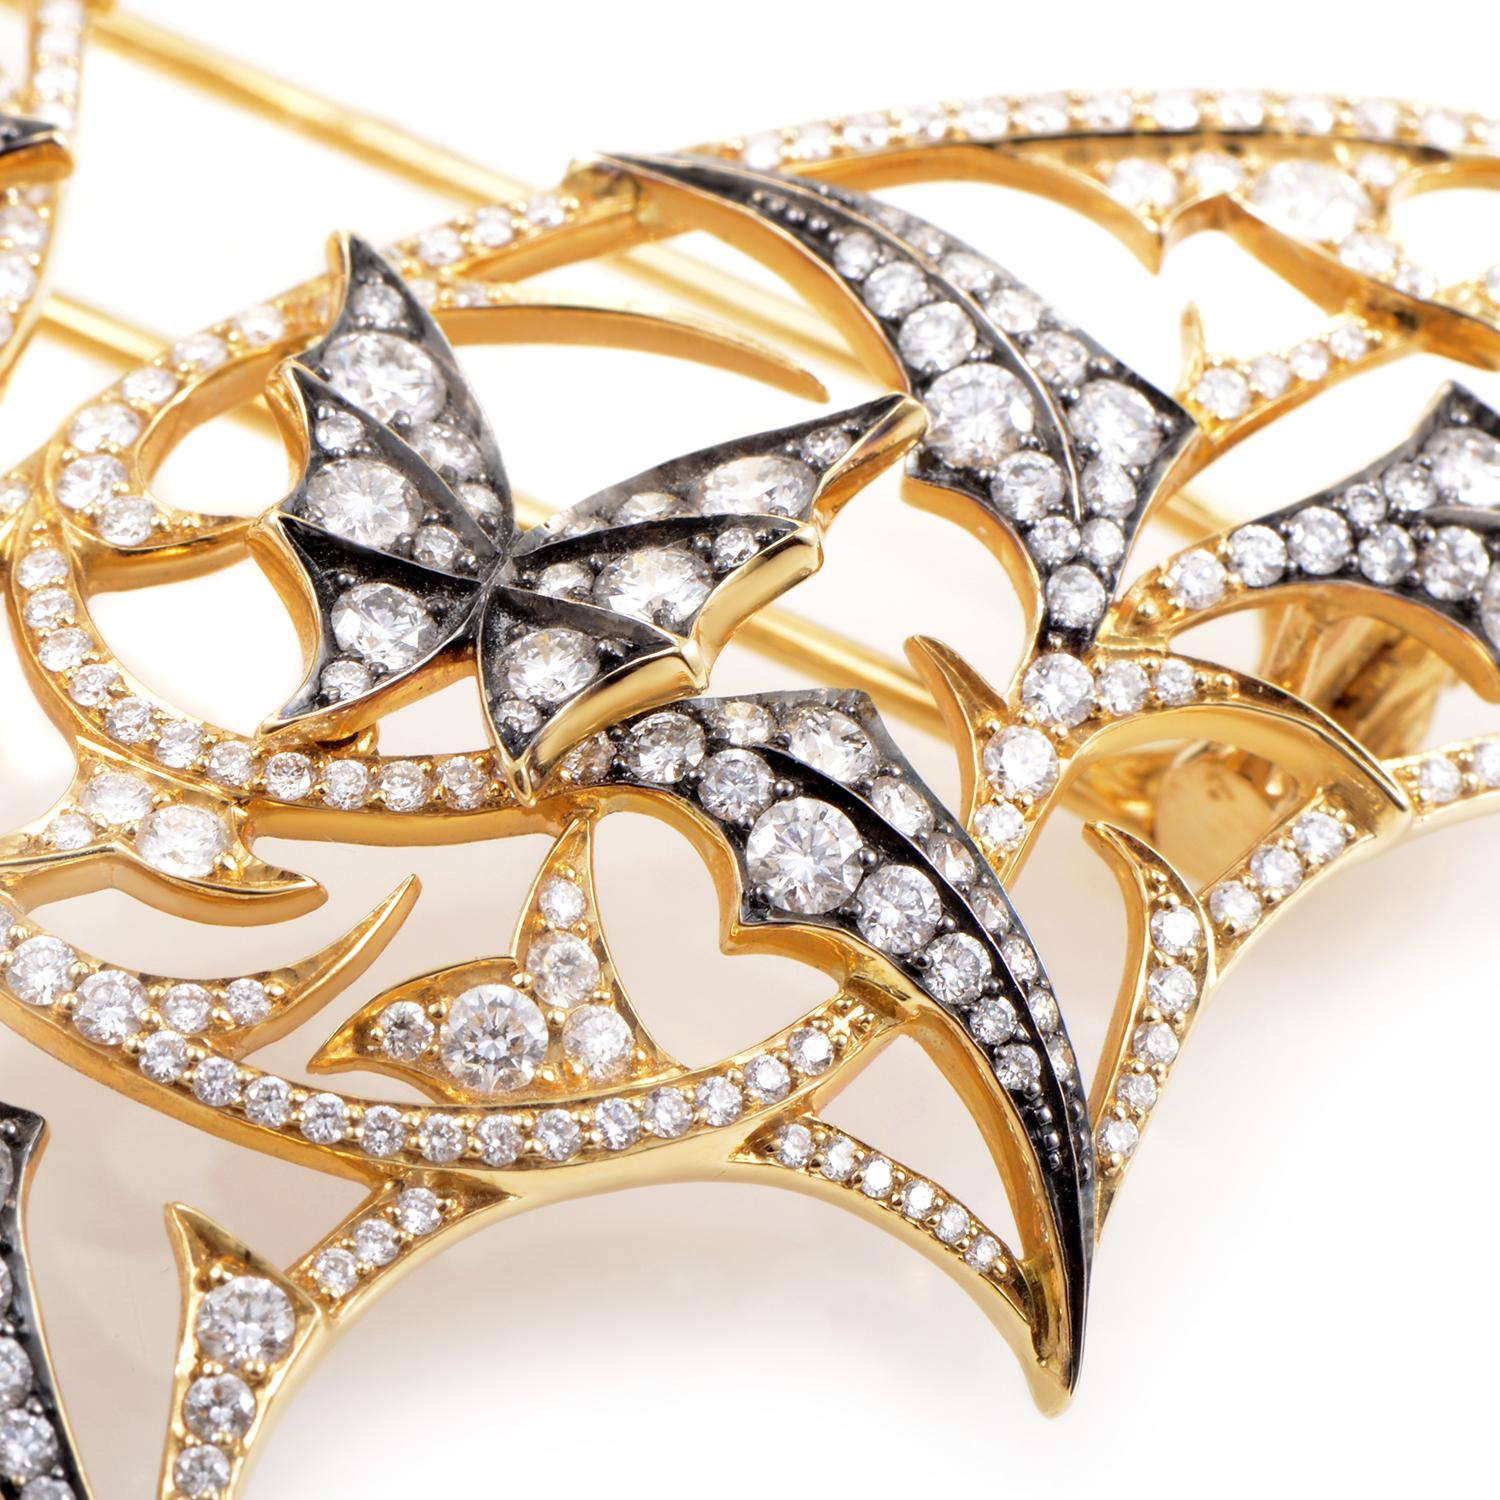 Masterfully crafted from precious 18K yellow gold, this gorgeous Stephen Webster brooch boasts highly detailed and enchanting butterfly motif decorations. The alluring appearance of the brooch's glossy finish is further stimulated by the glamorous